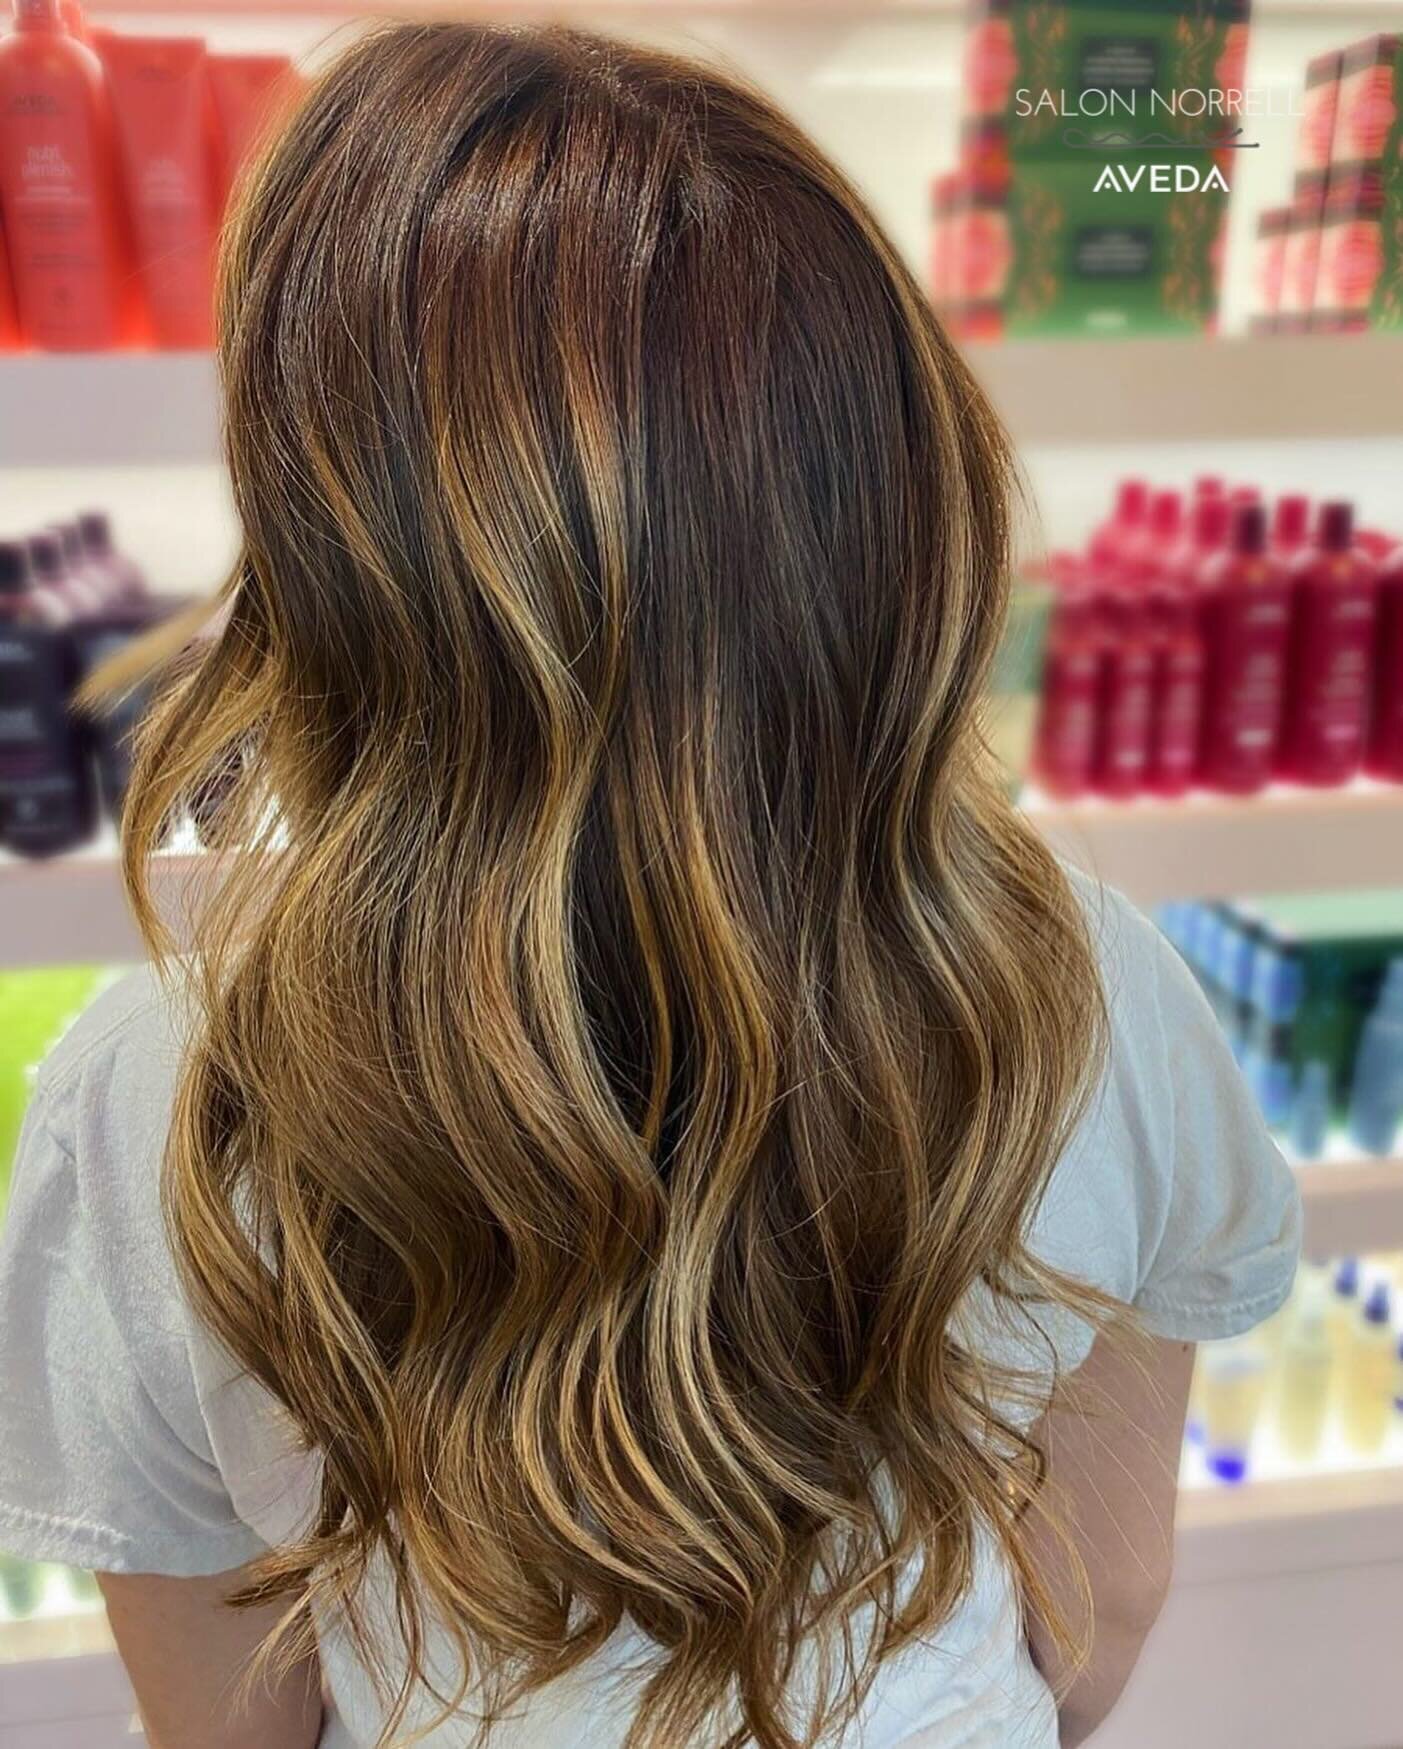 Hair | jessica 
Make your reservation today! 
🗓Reservations are best 
📲Text 813-590-6765 
☎️Call 813-265-2000 
🔗 Link in bio to book online
 💻TampaAveda.com 
📍Tampa, Florida 
🏷 tag us #salonnorrell